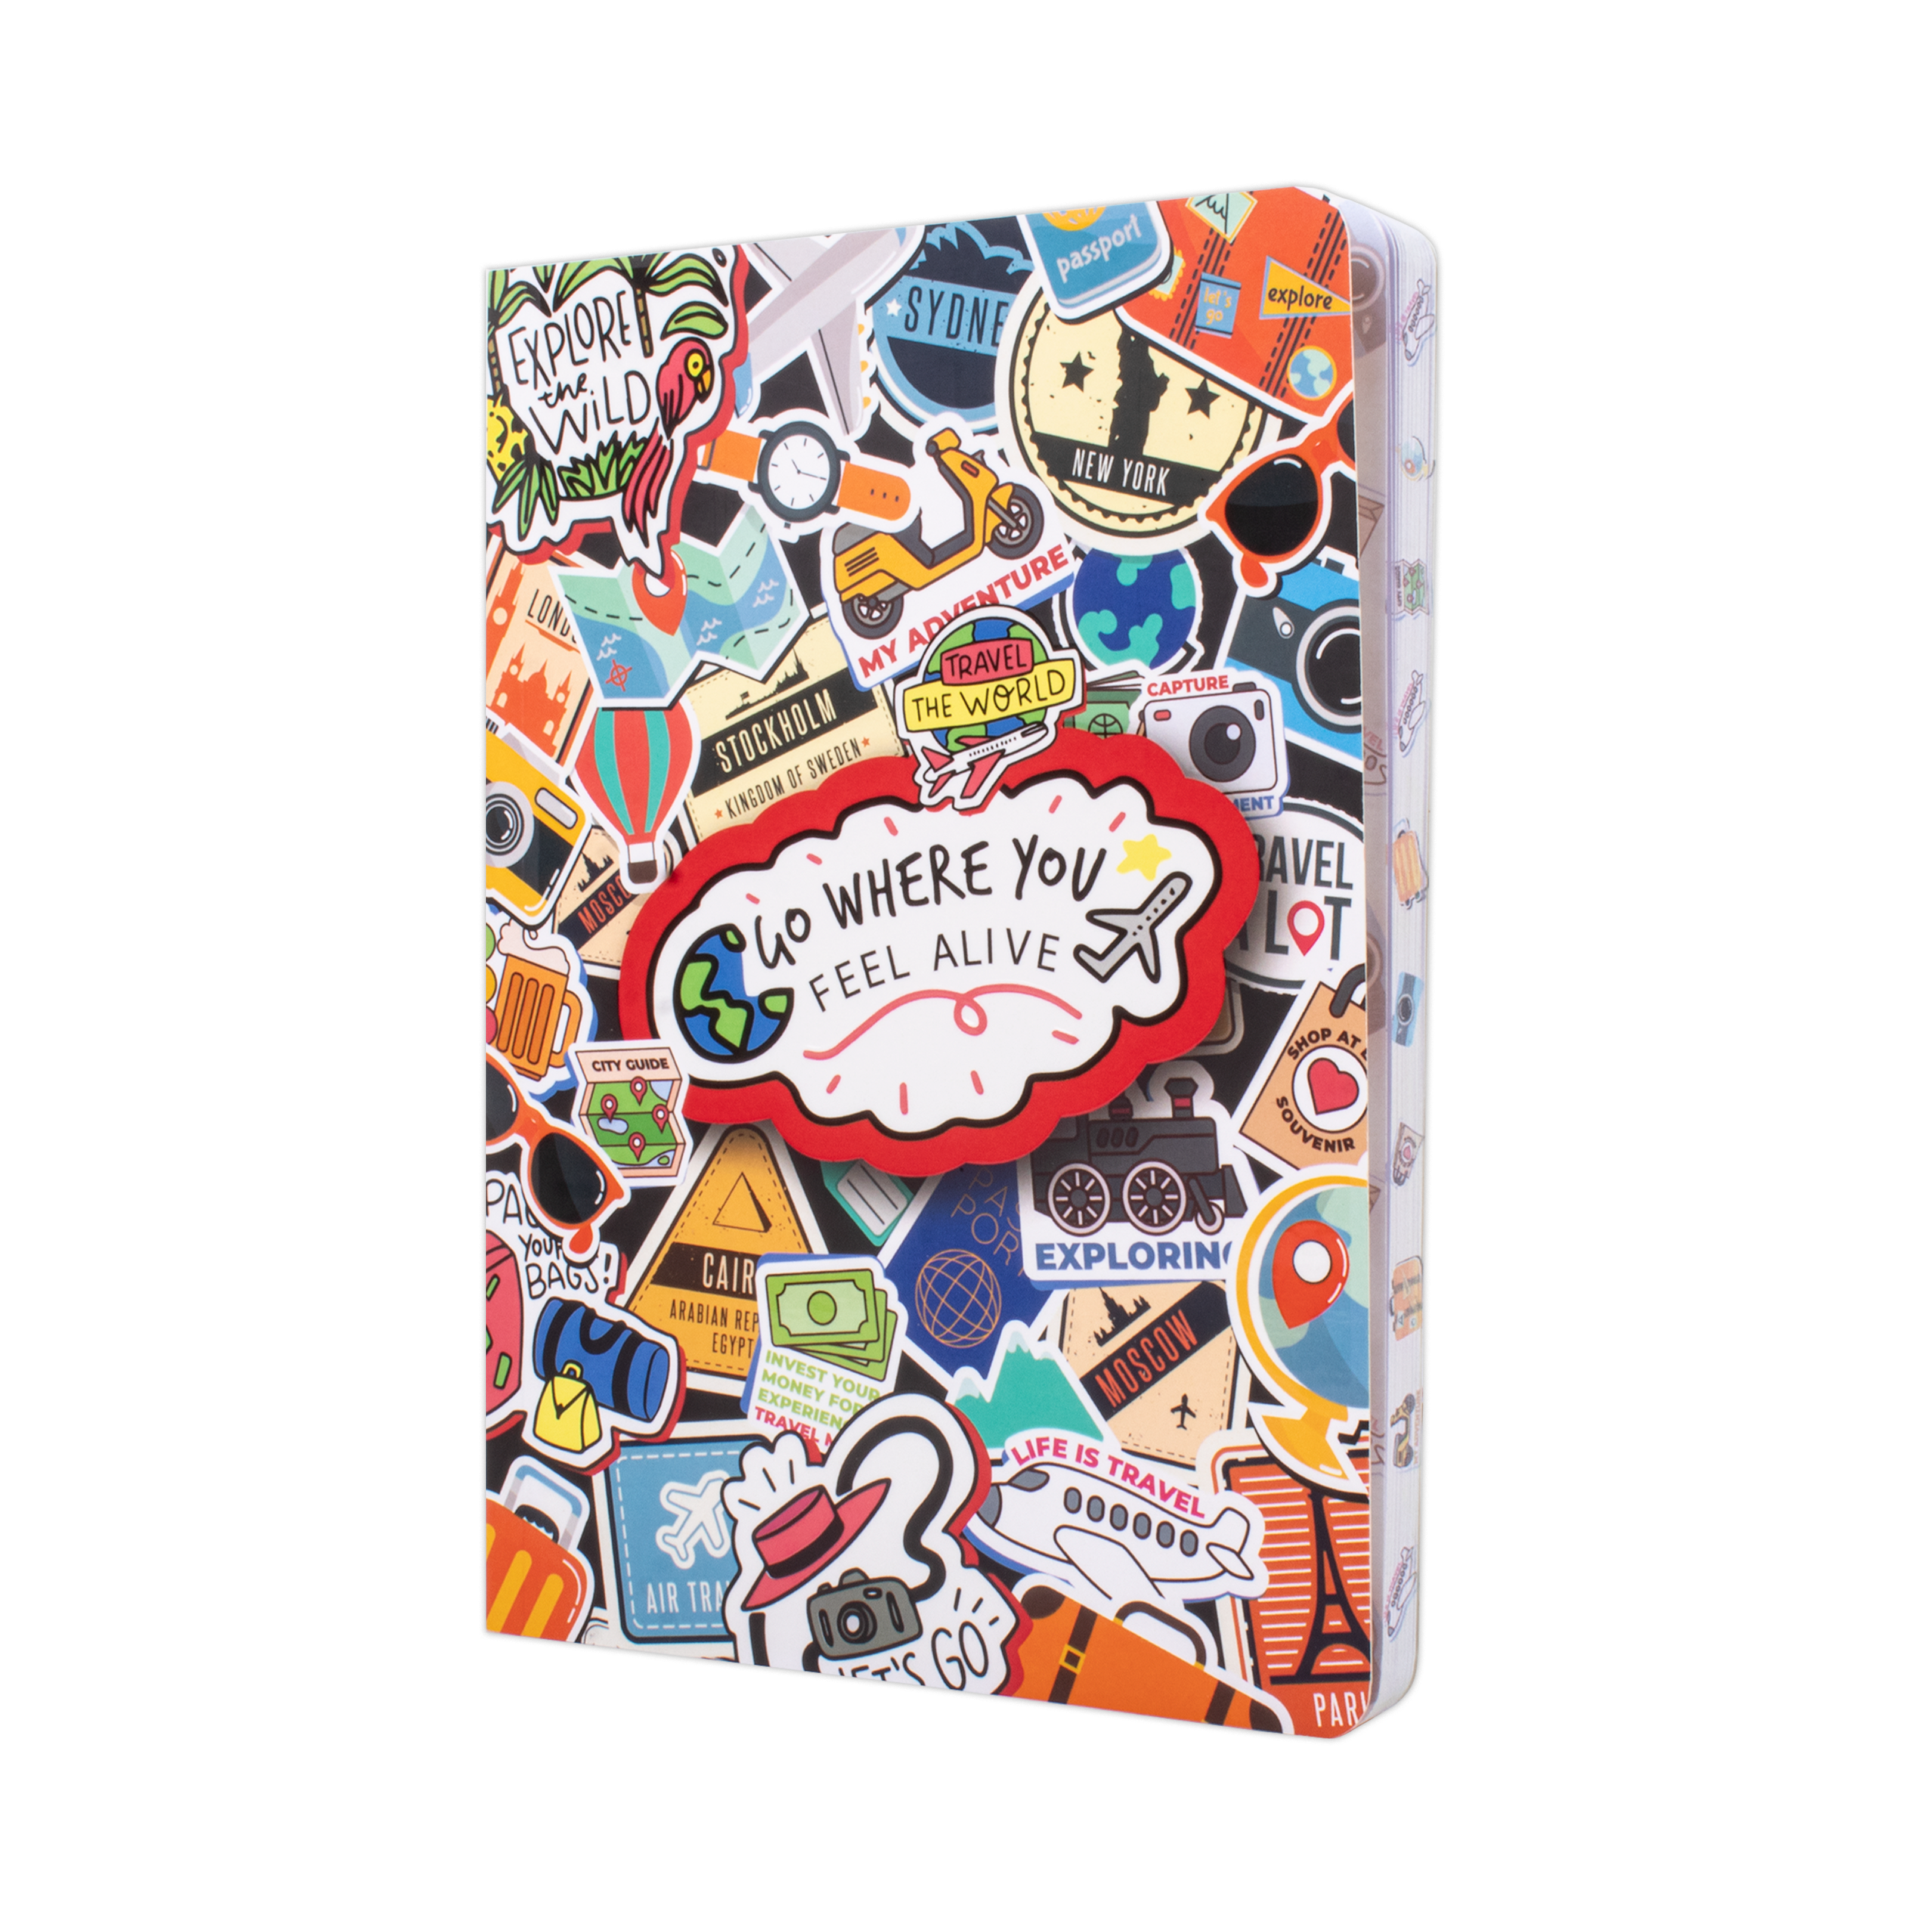 Softbound Ruled Notebook Travel Edge Printed A5 128pages 100gsm